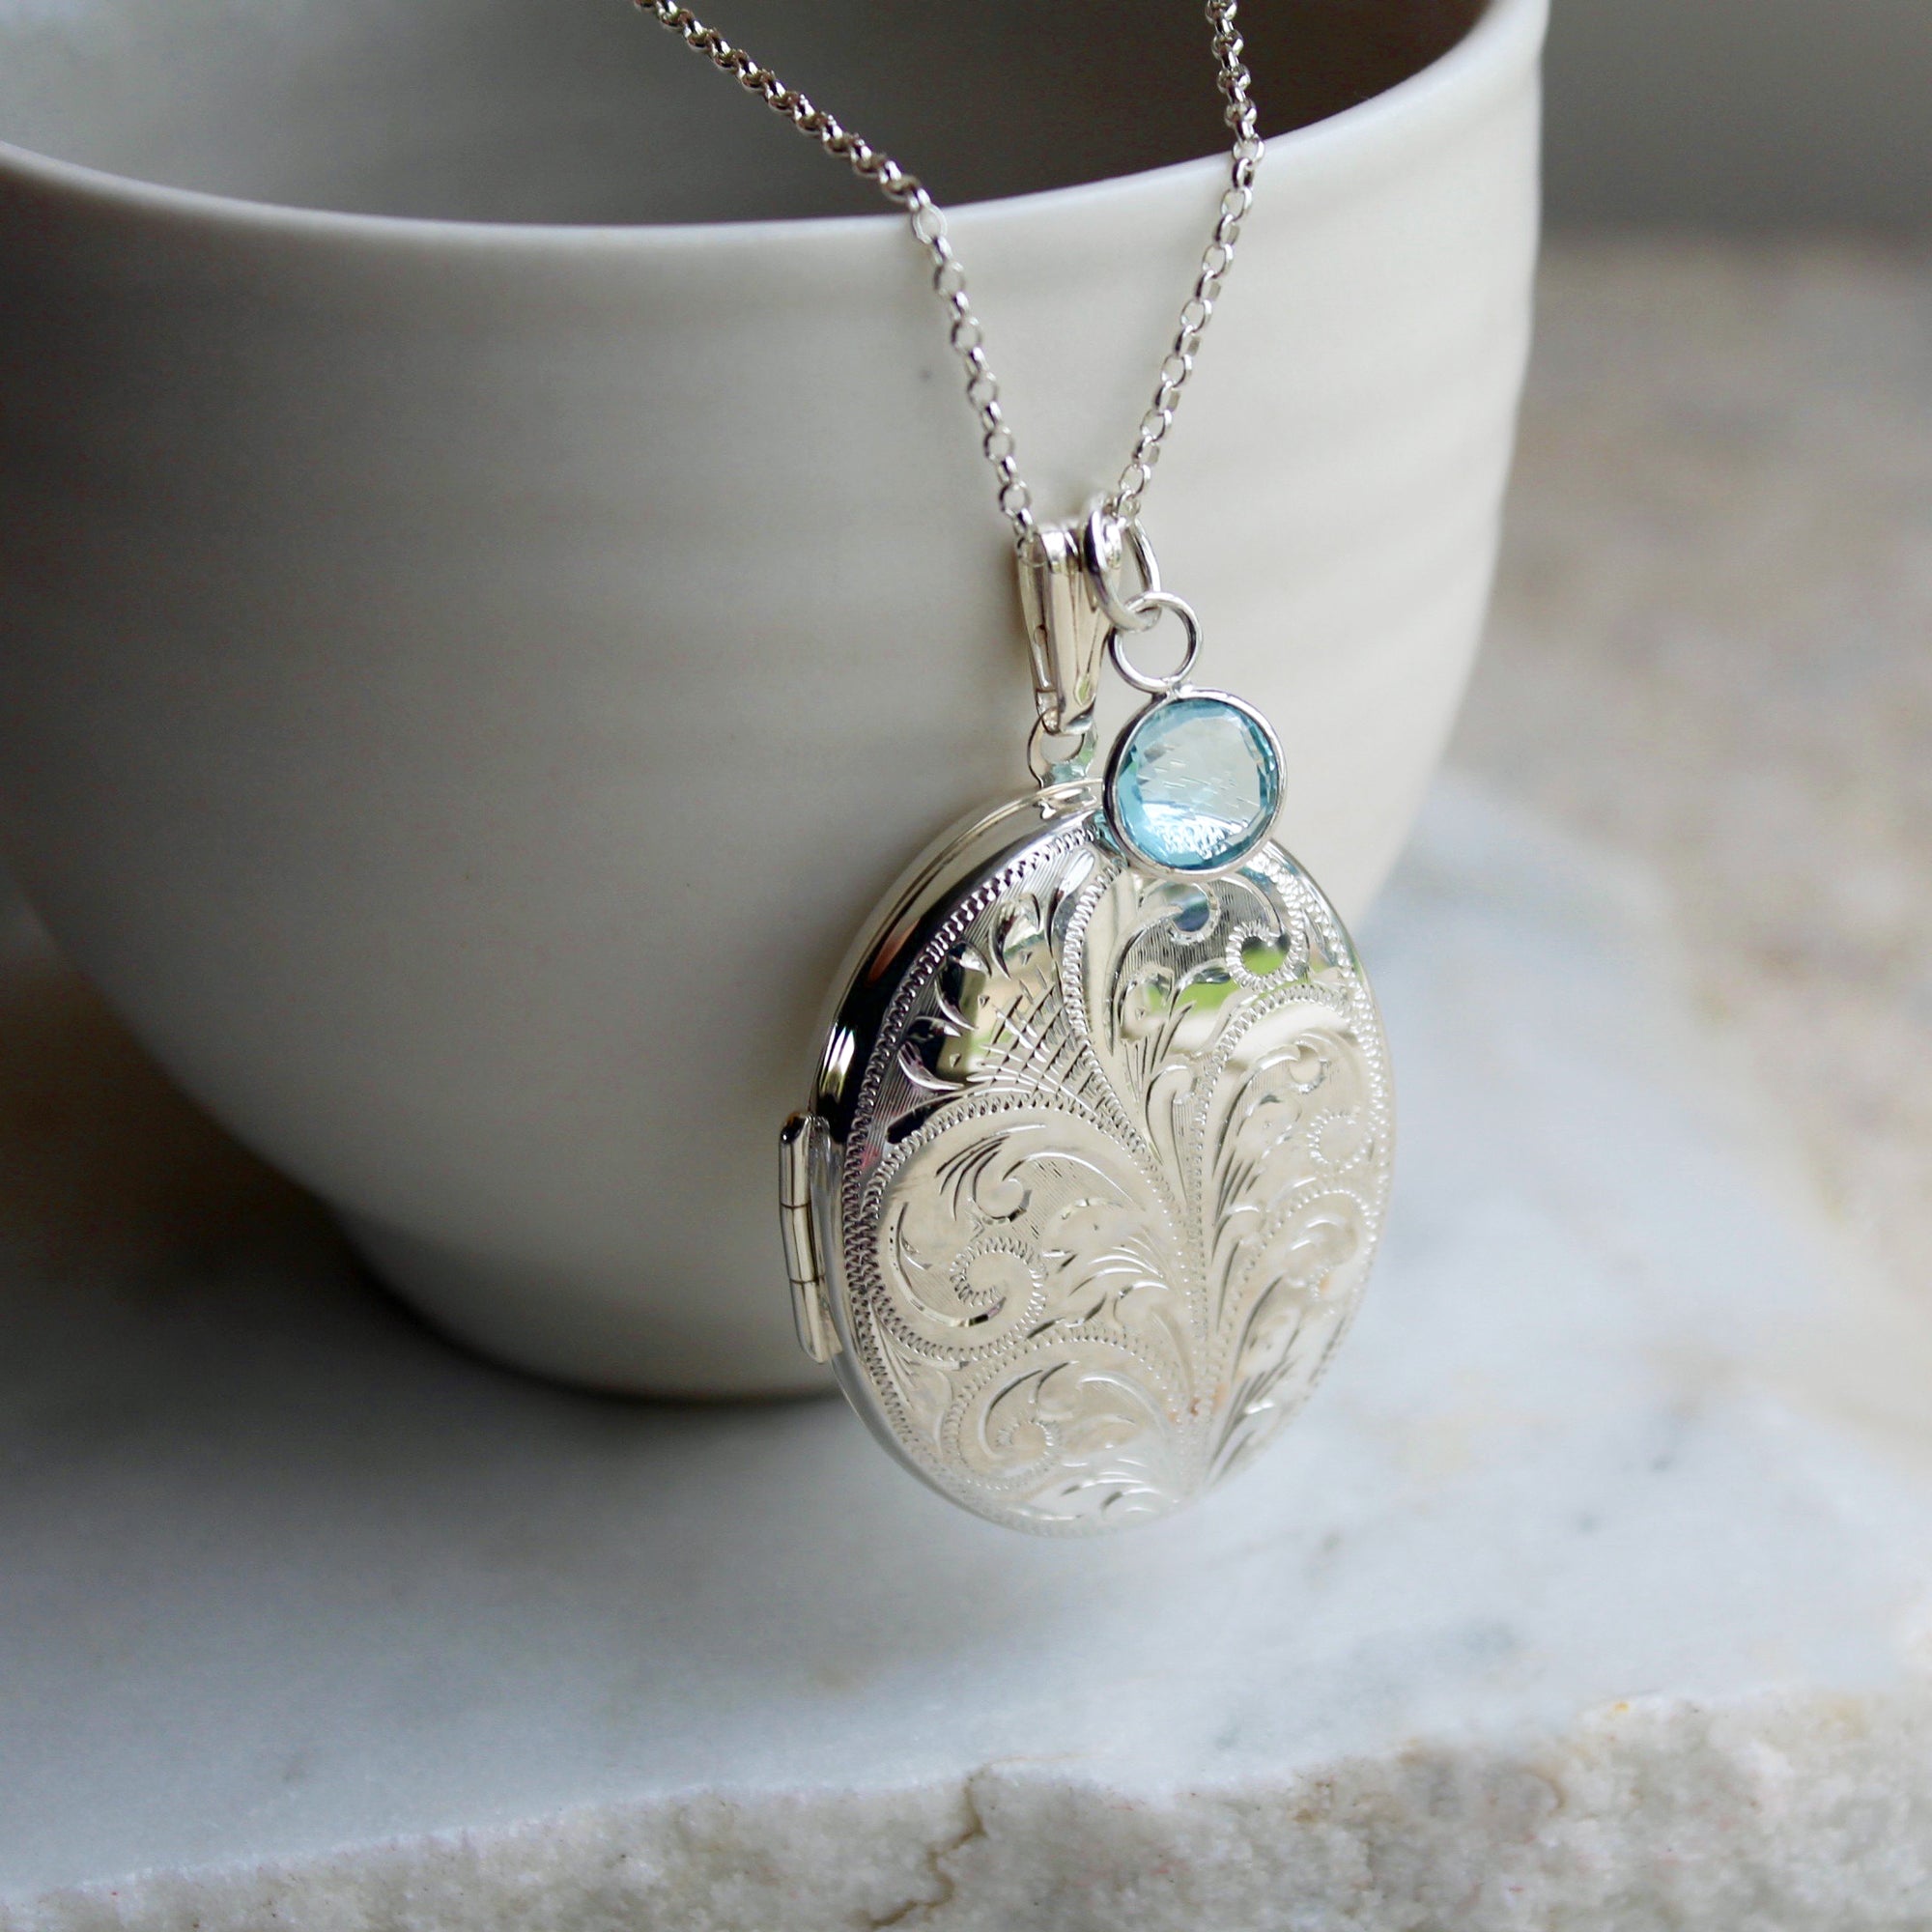 Buy Huge Floral Design Silver Locket Necklace, Locket Necklace Floral,  Antiqued Pendant, Picture Necklace for Women, Gift Ideas for Her Online in  India - Etsy